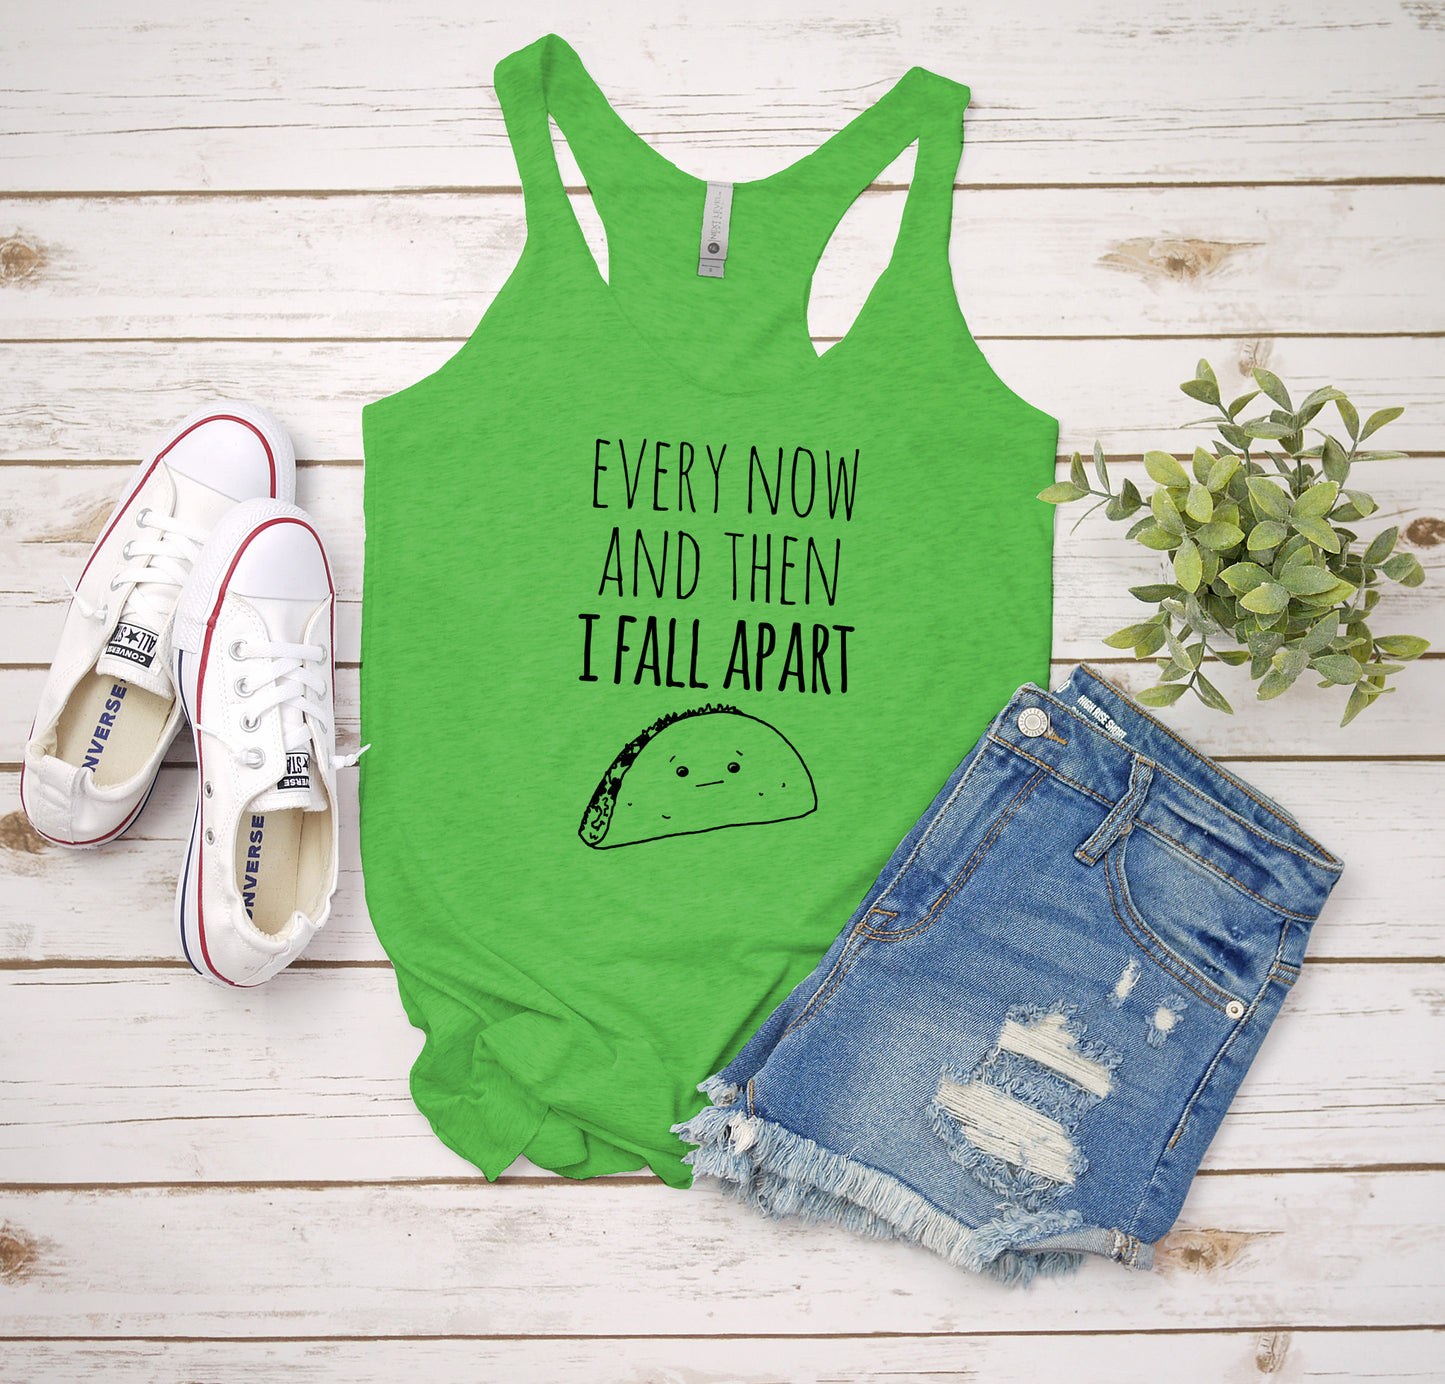 Every Now And Then I Fall Apart (Taco) - Women's Tank - Heather Gray, Tahiti, or Envy